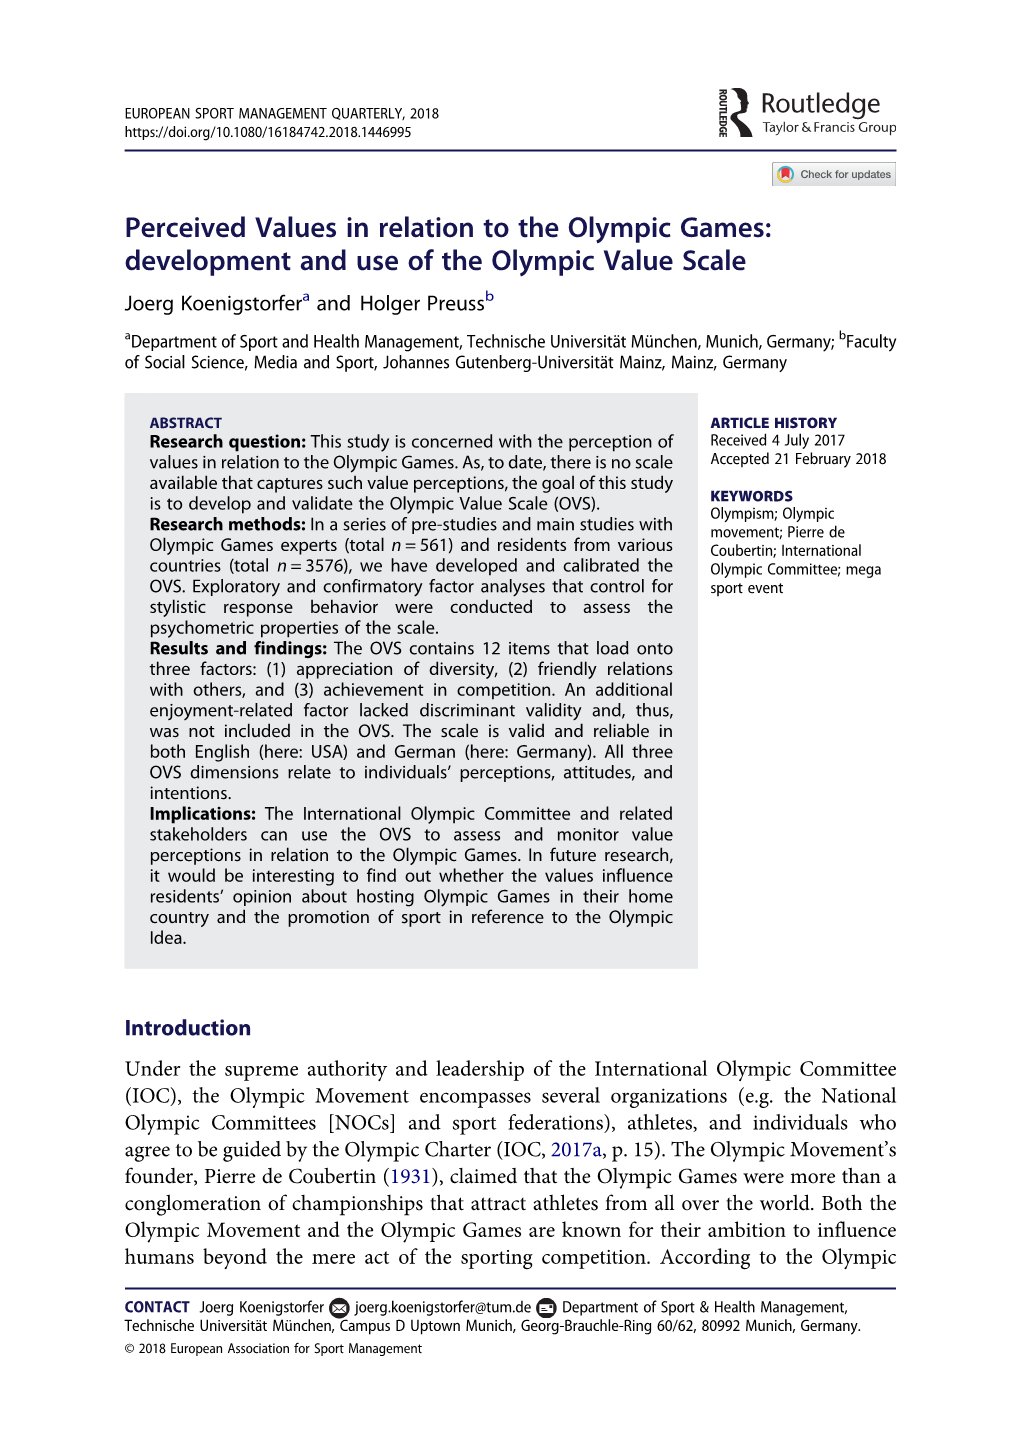 Perceived Values in Relation to the Olympic Games: Development and Use of the Olympic Value Scale